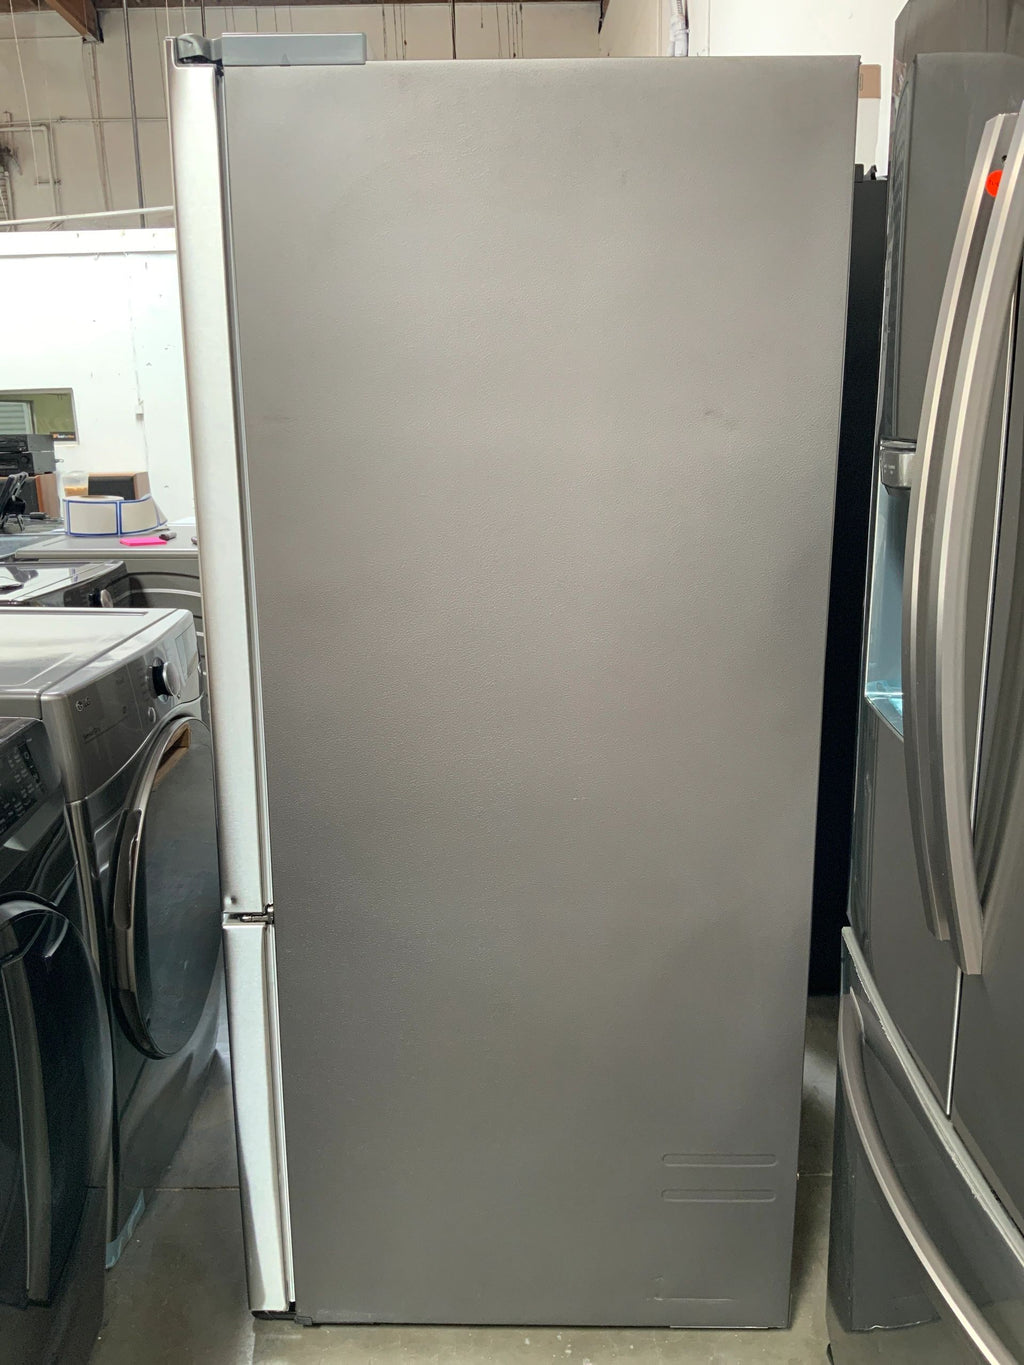 New Dent and Scratch. 28.2 cu. ft. French Door Refrigerator in Stainless Steel with internal water dispenser. Model: RF28T5101SR